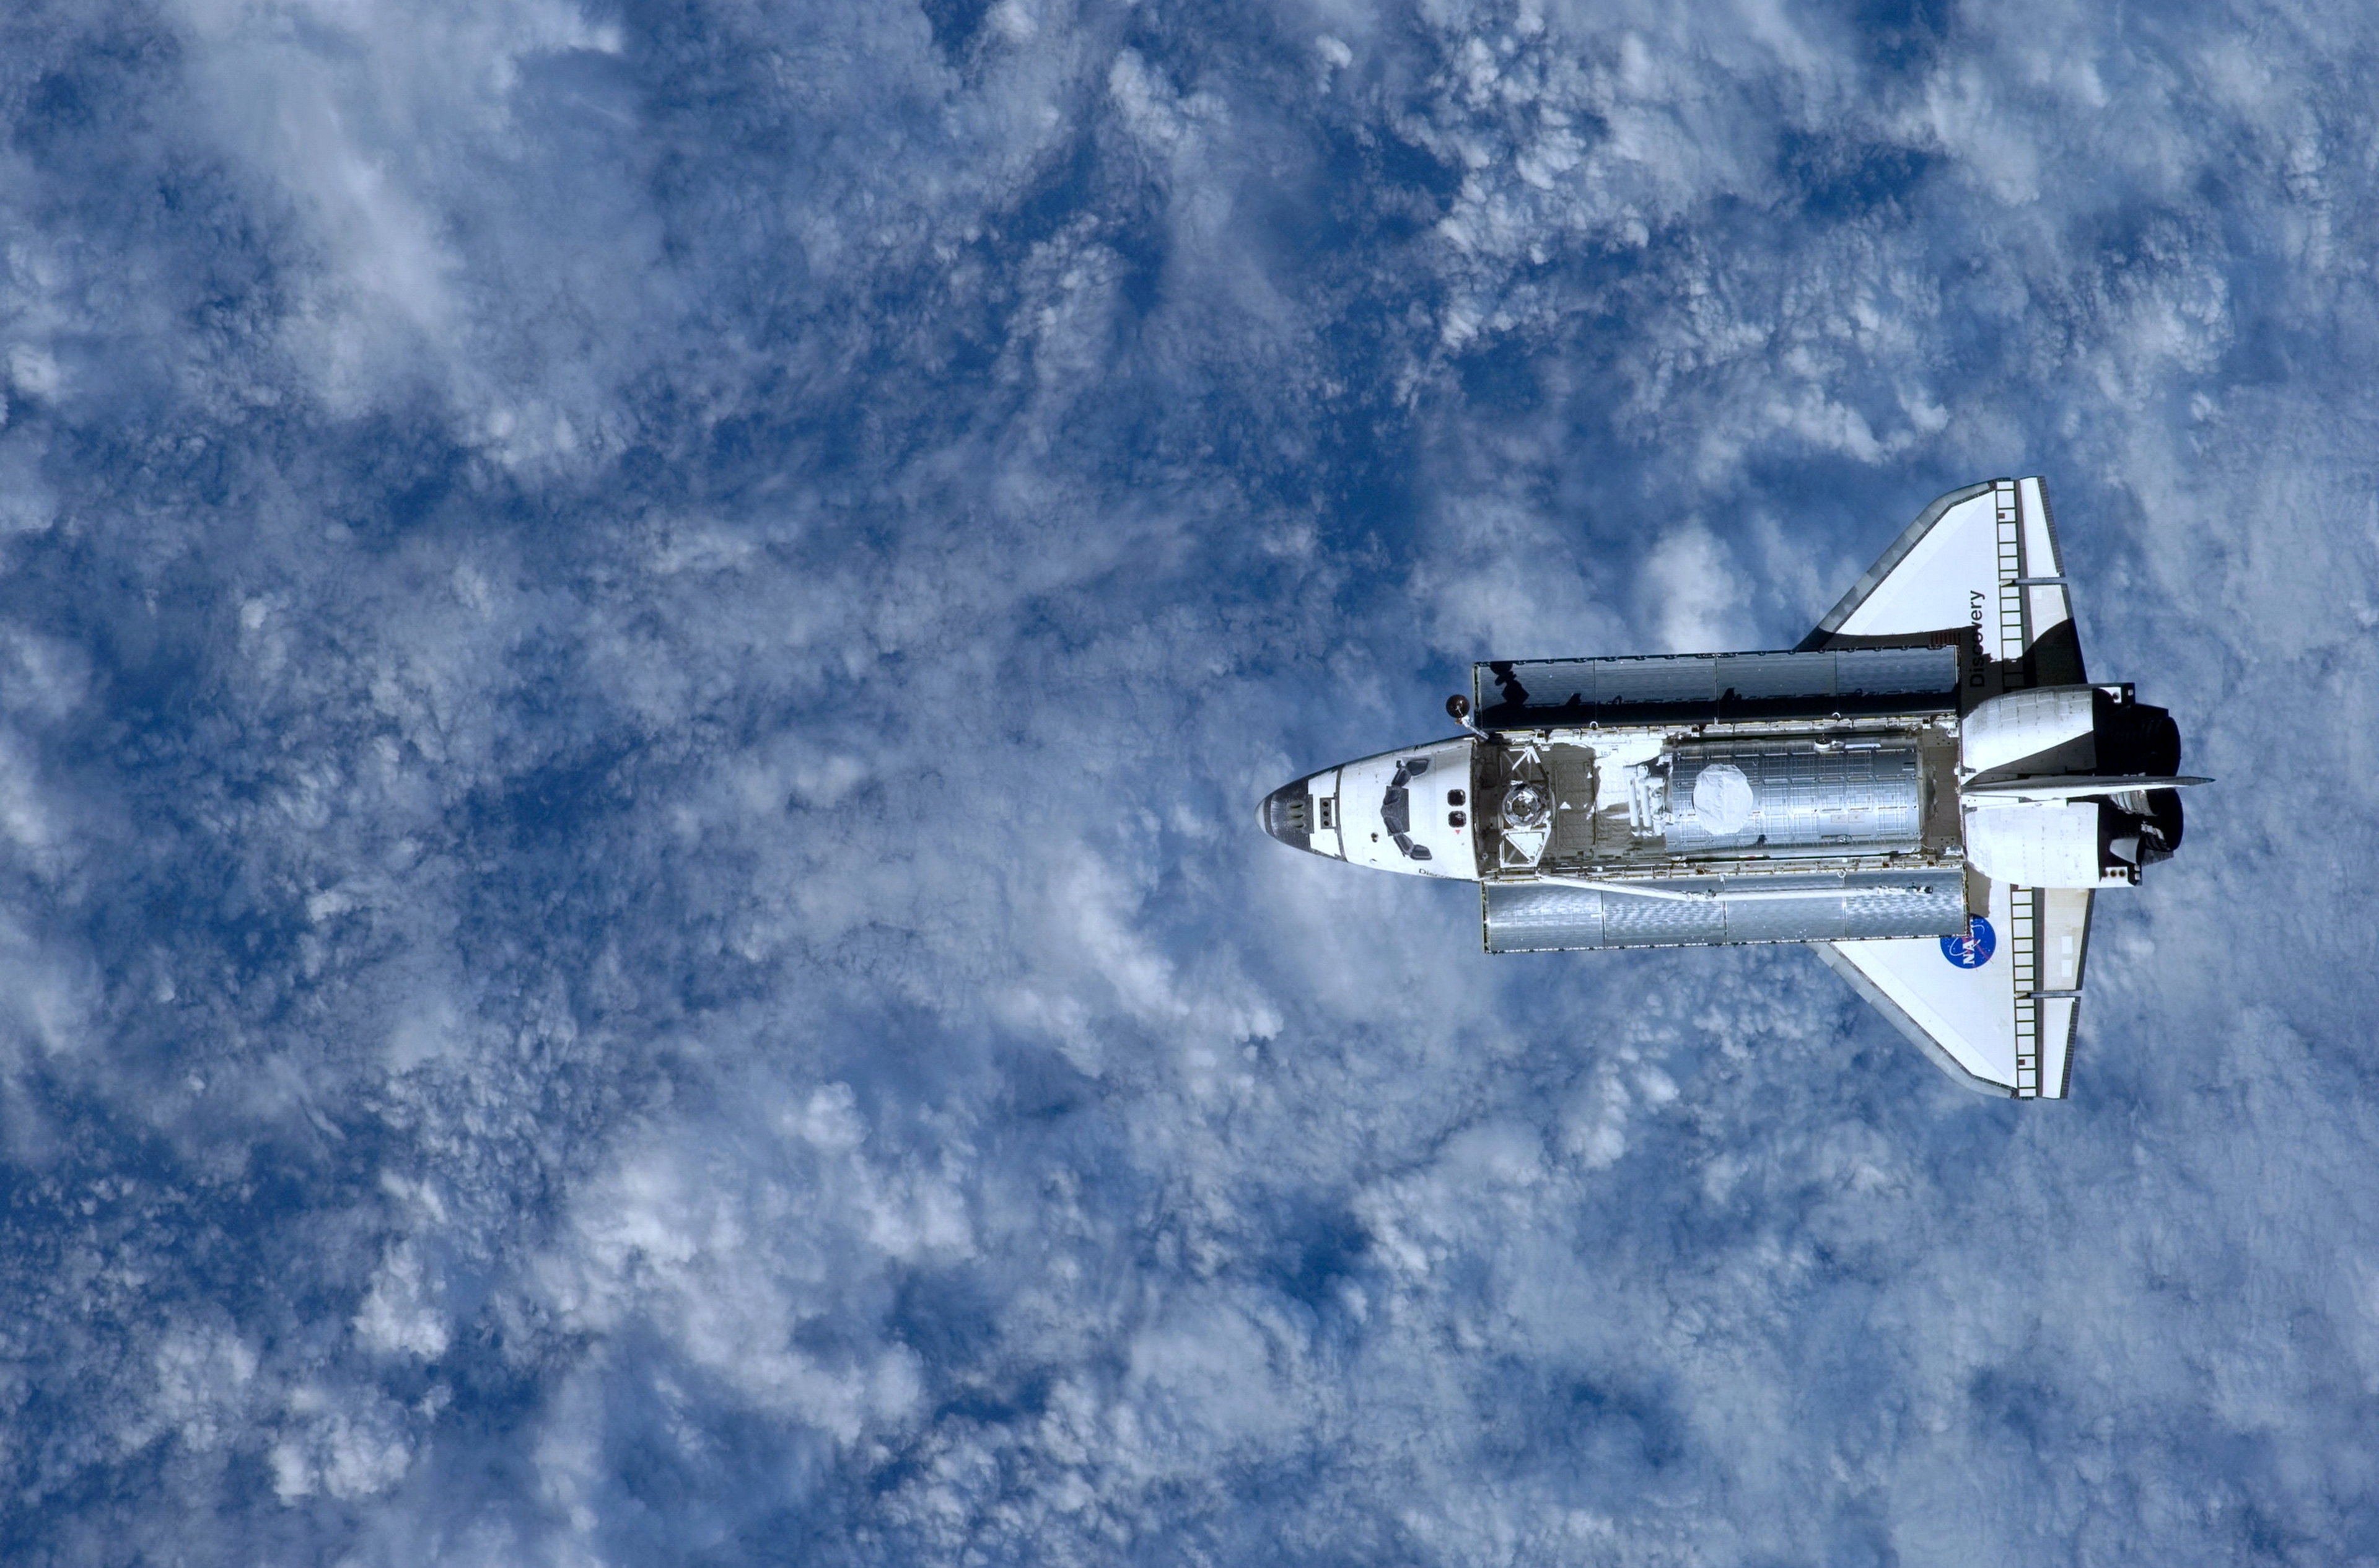 vehicles, space shuttle discovery, cloud, nasa, sky, space shuttle, space shuttles